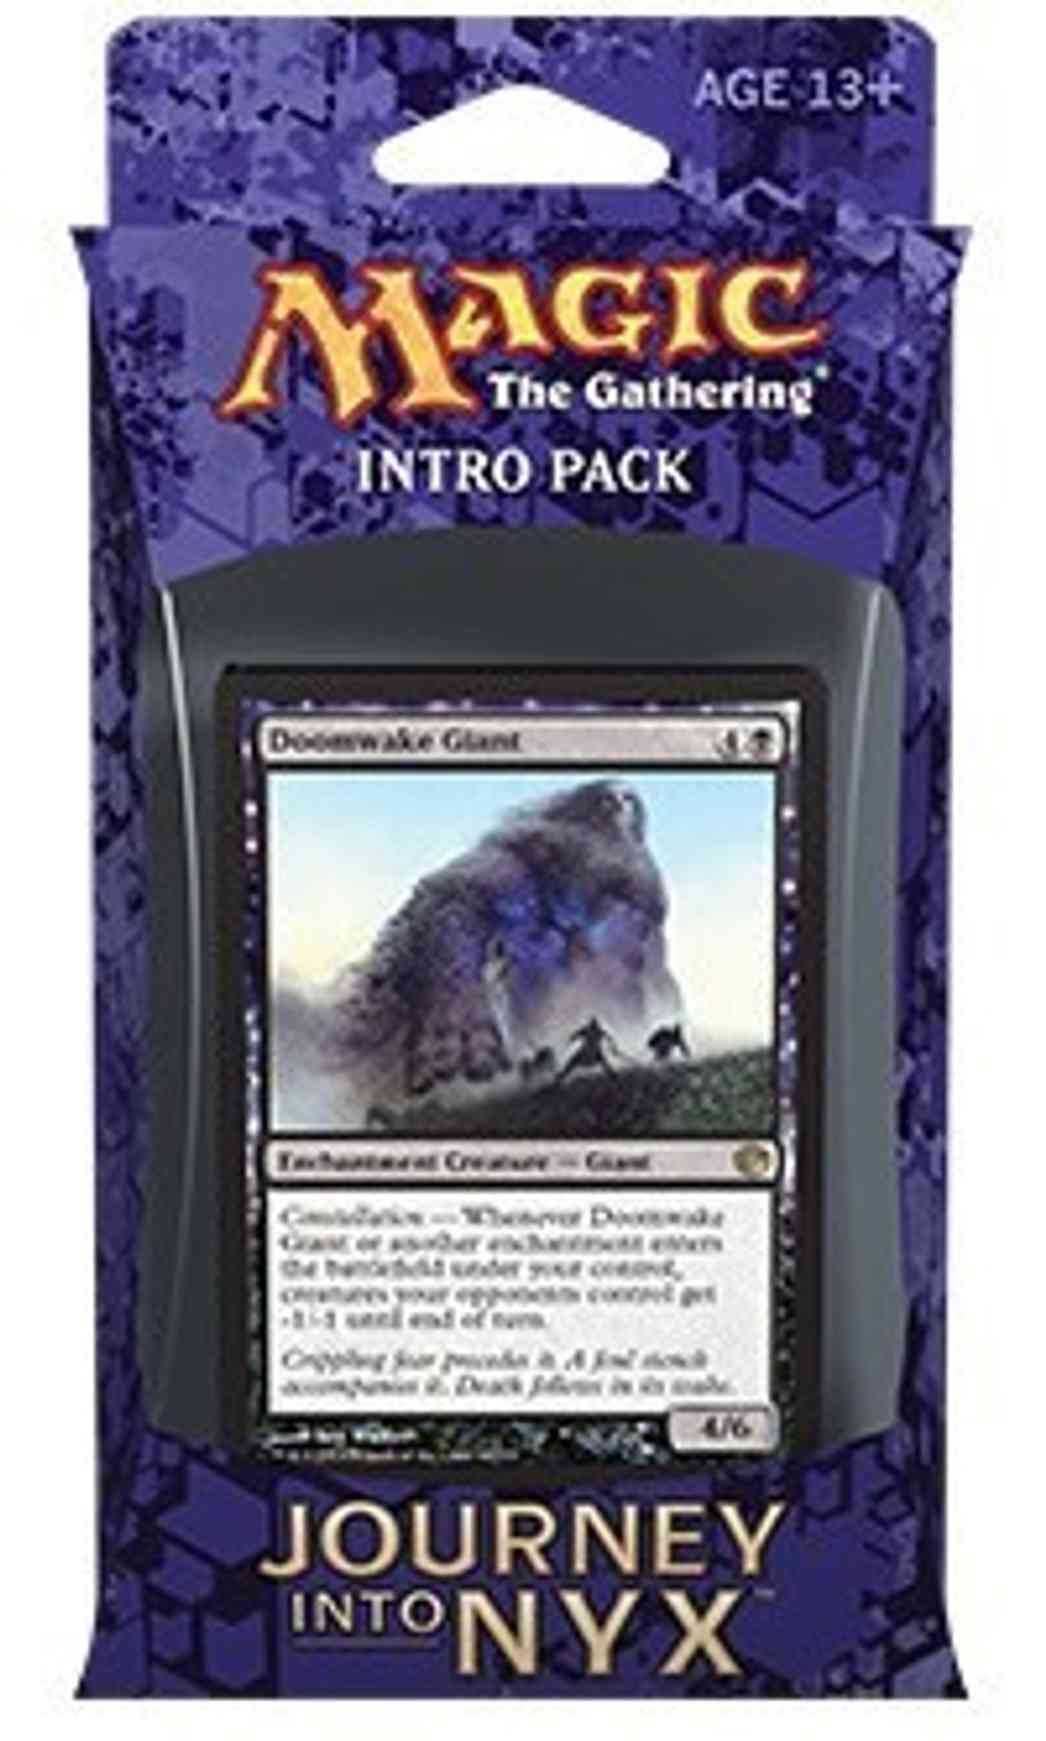 Journey Into Nyx Intro Pack - Pantheon's Power magic card front